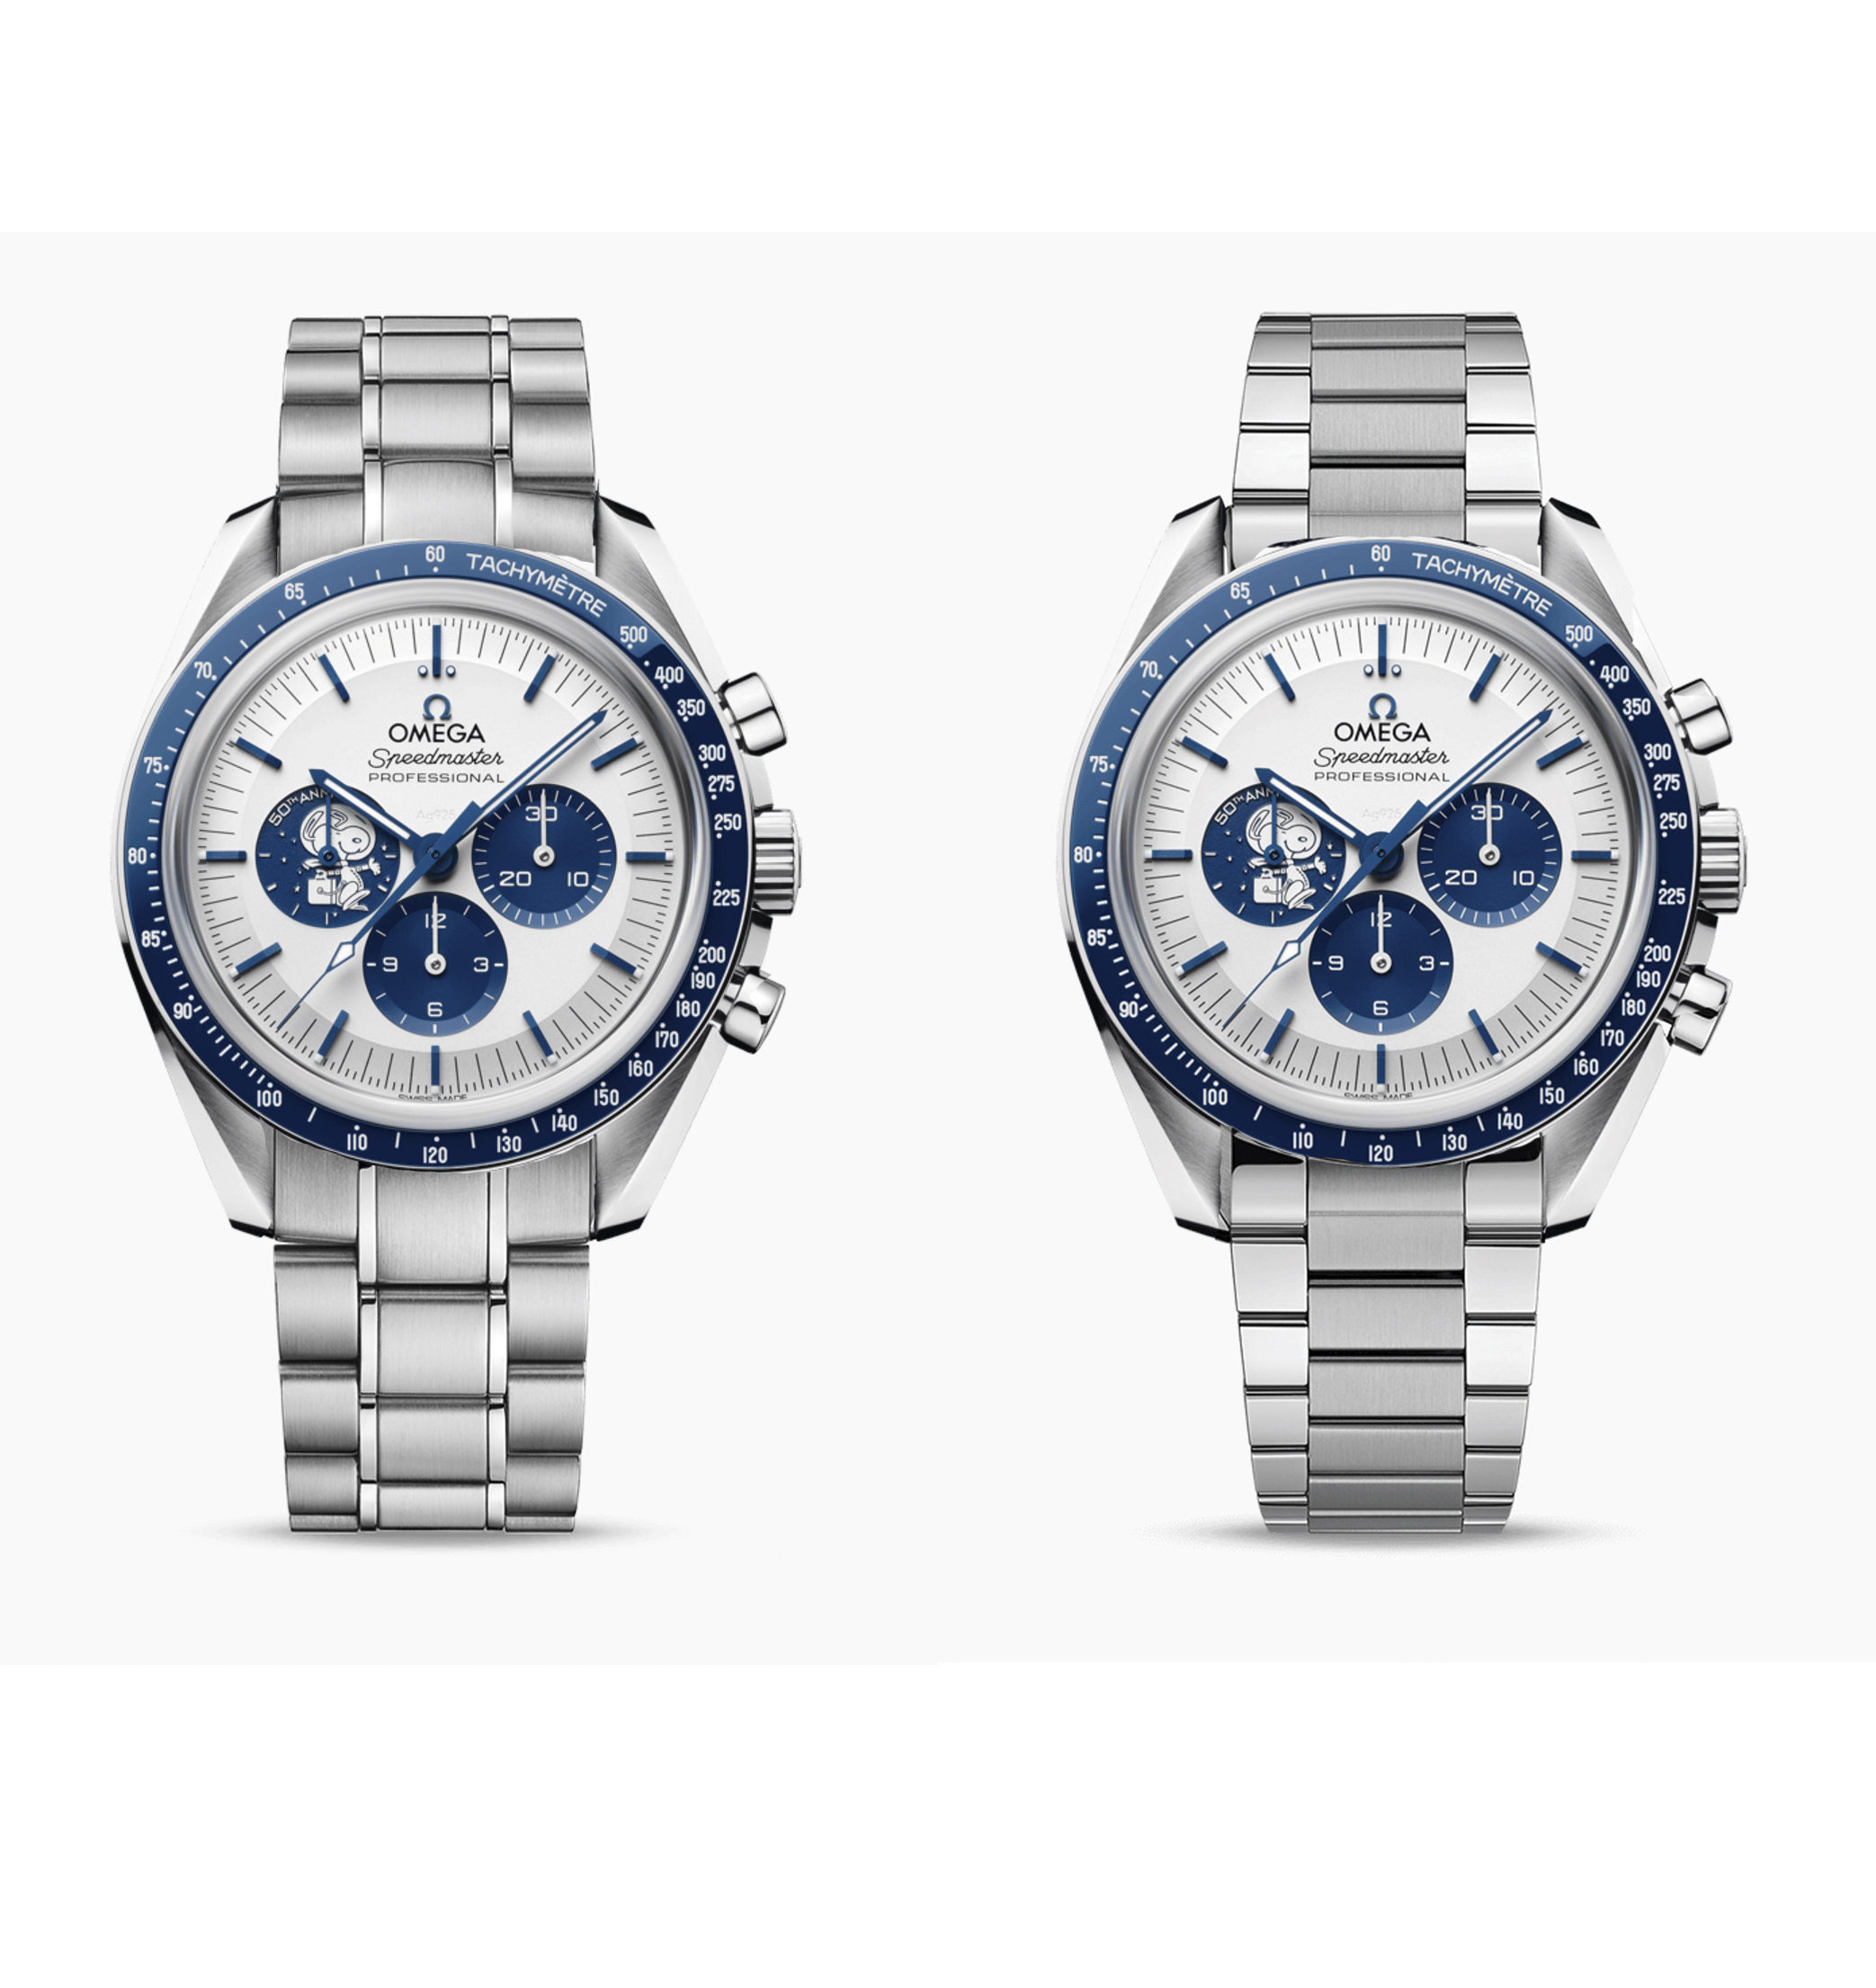 In The Metal: All Three OMEGA Snoopy Speedmaster Watches